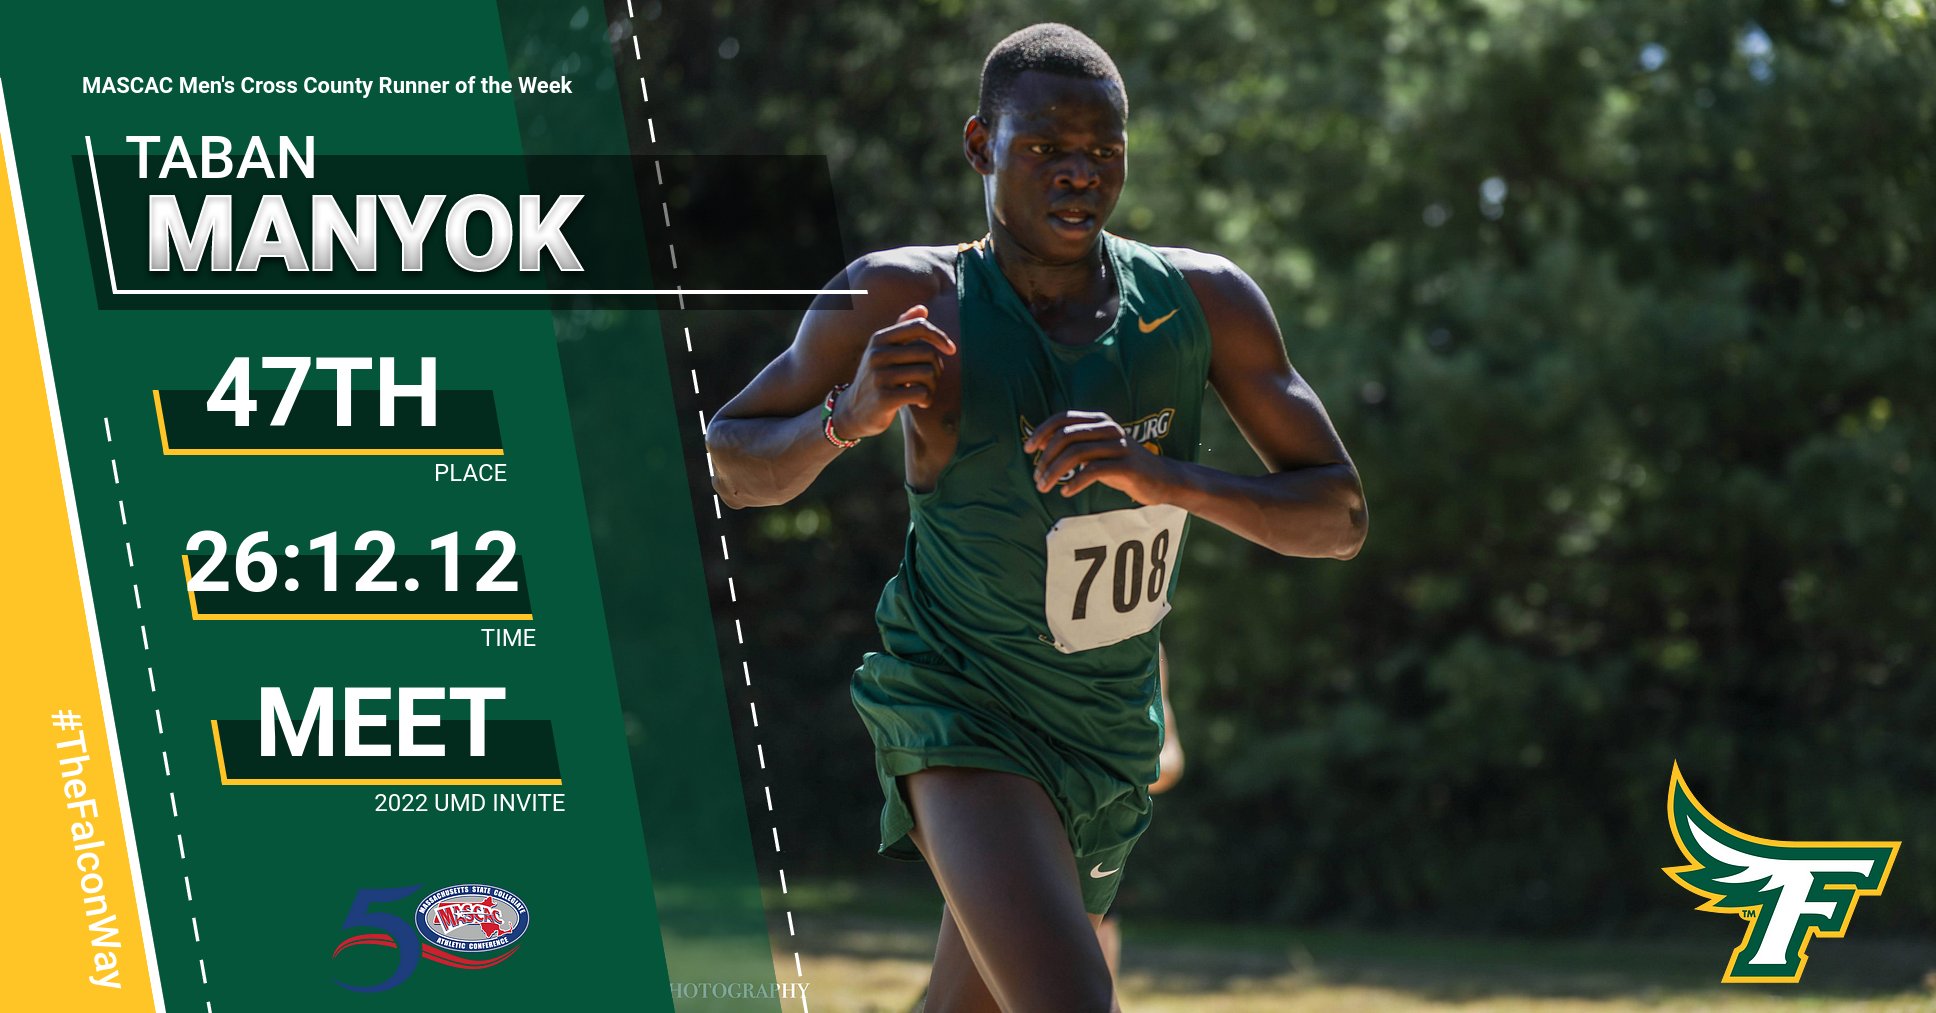 Manyok Notches MXC MASCAC Runner of the Week